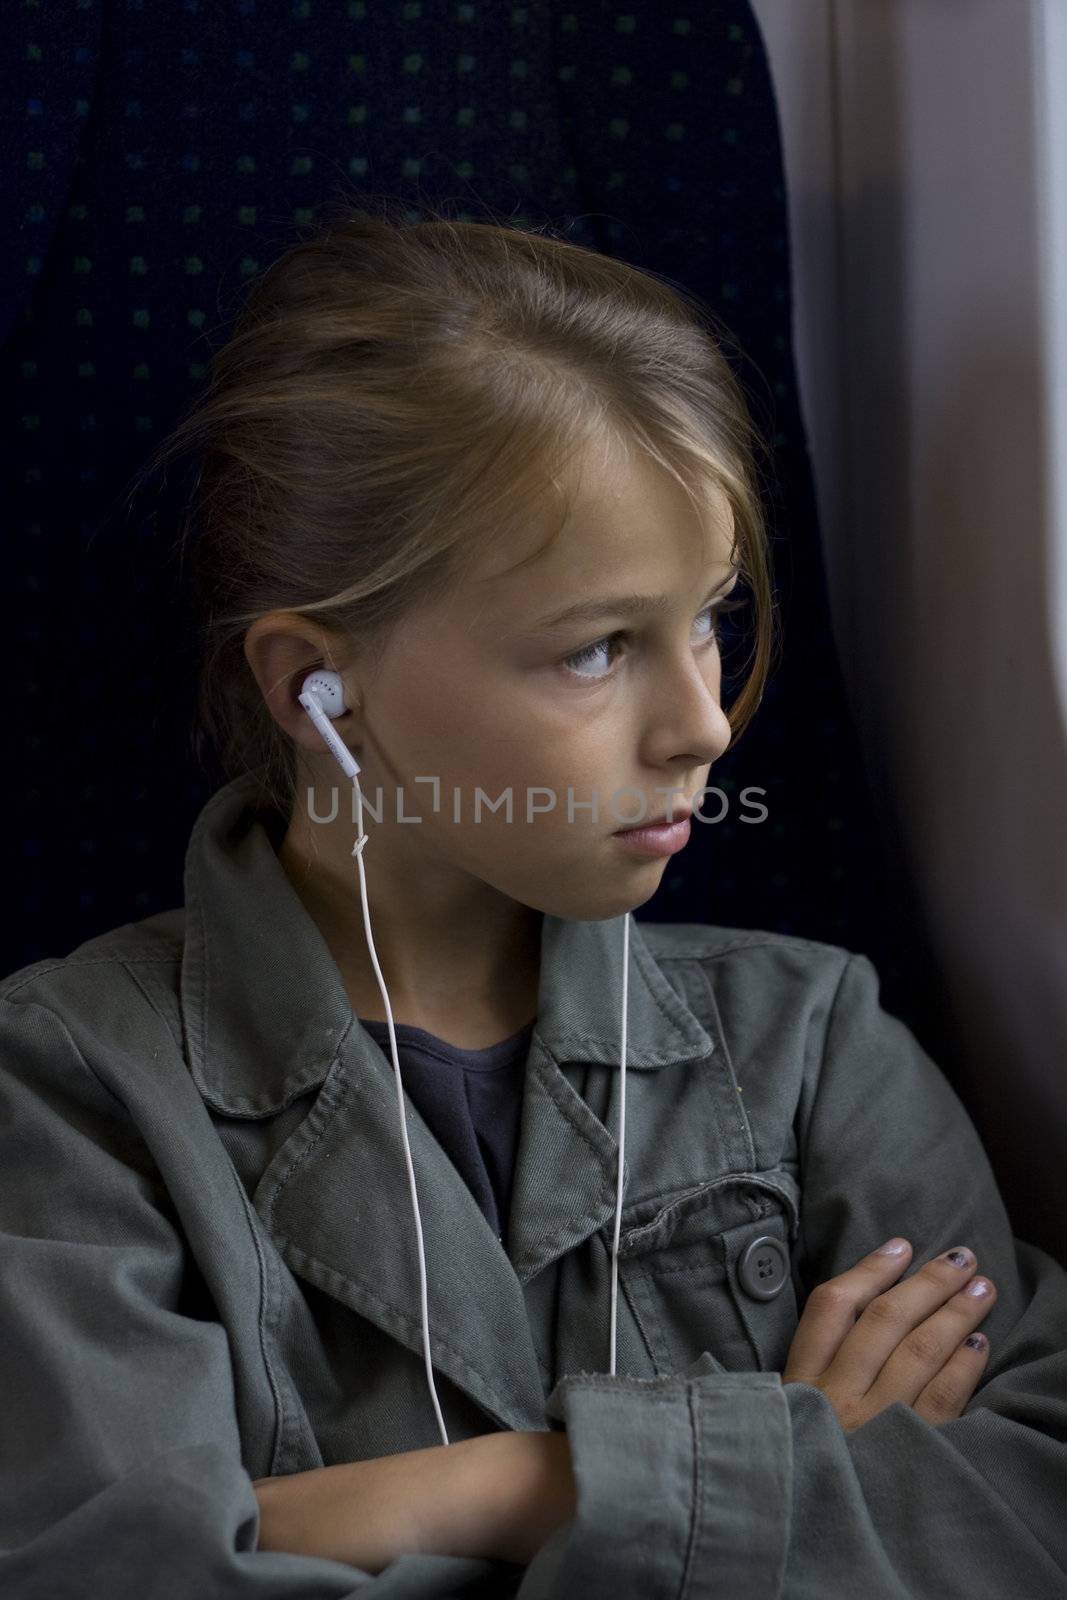 Young girl onboard a train by annems